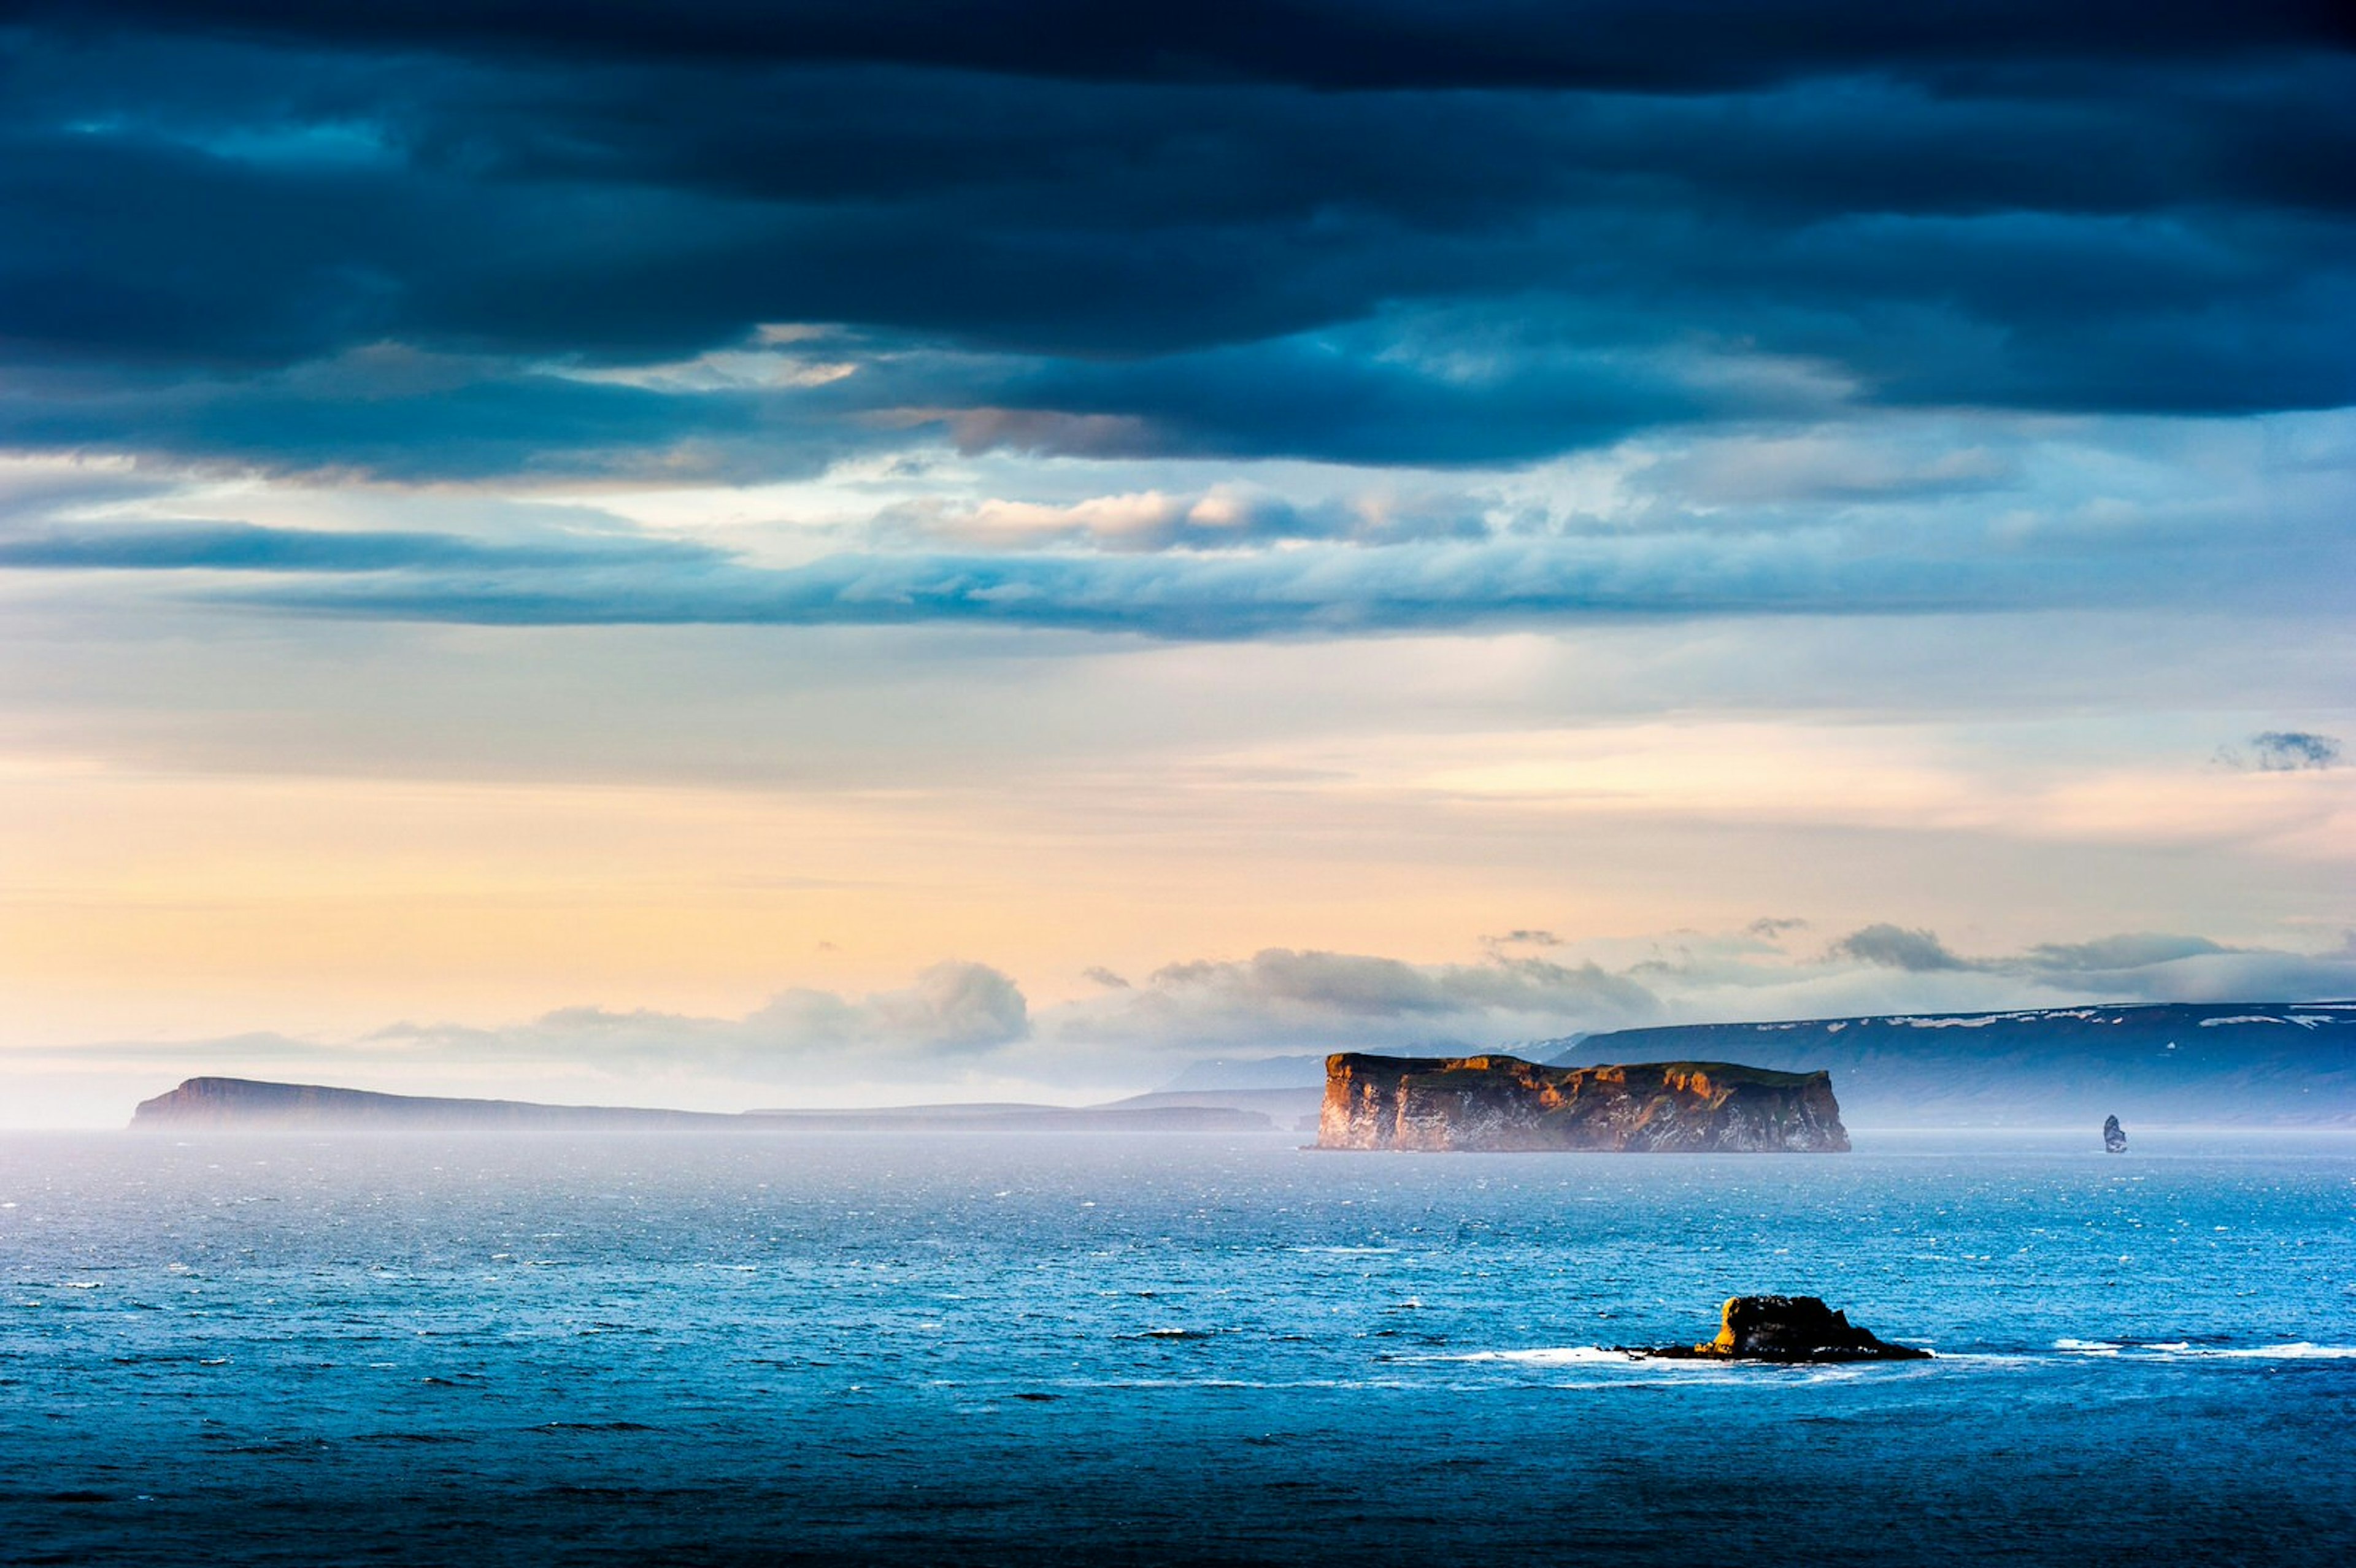 The remote island of Drangey sits in a dramatic landscape